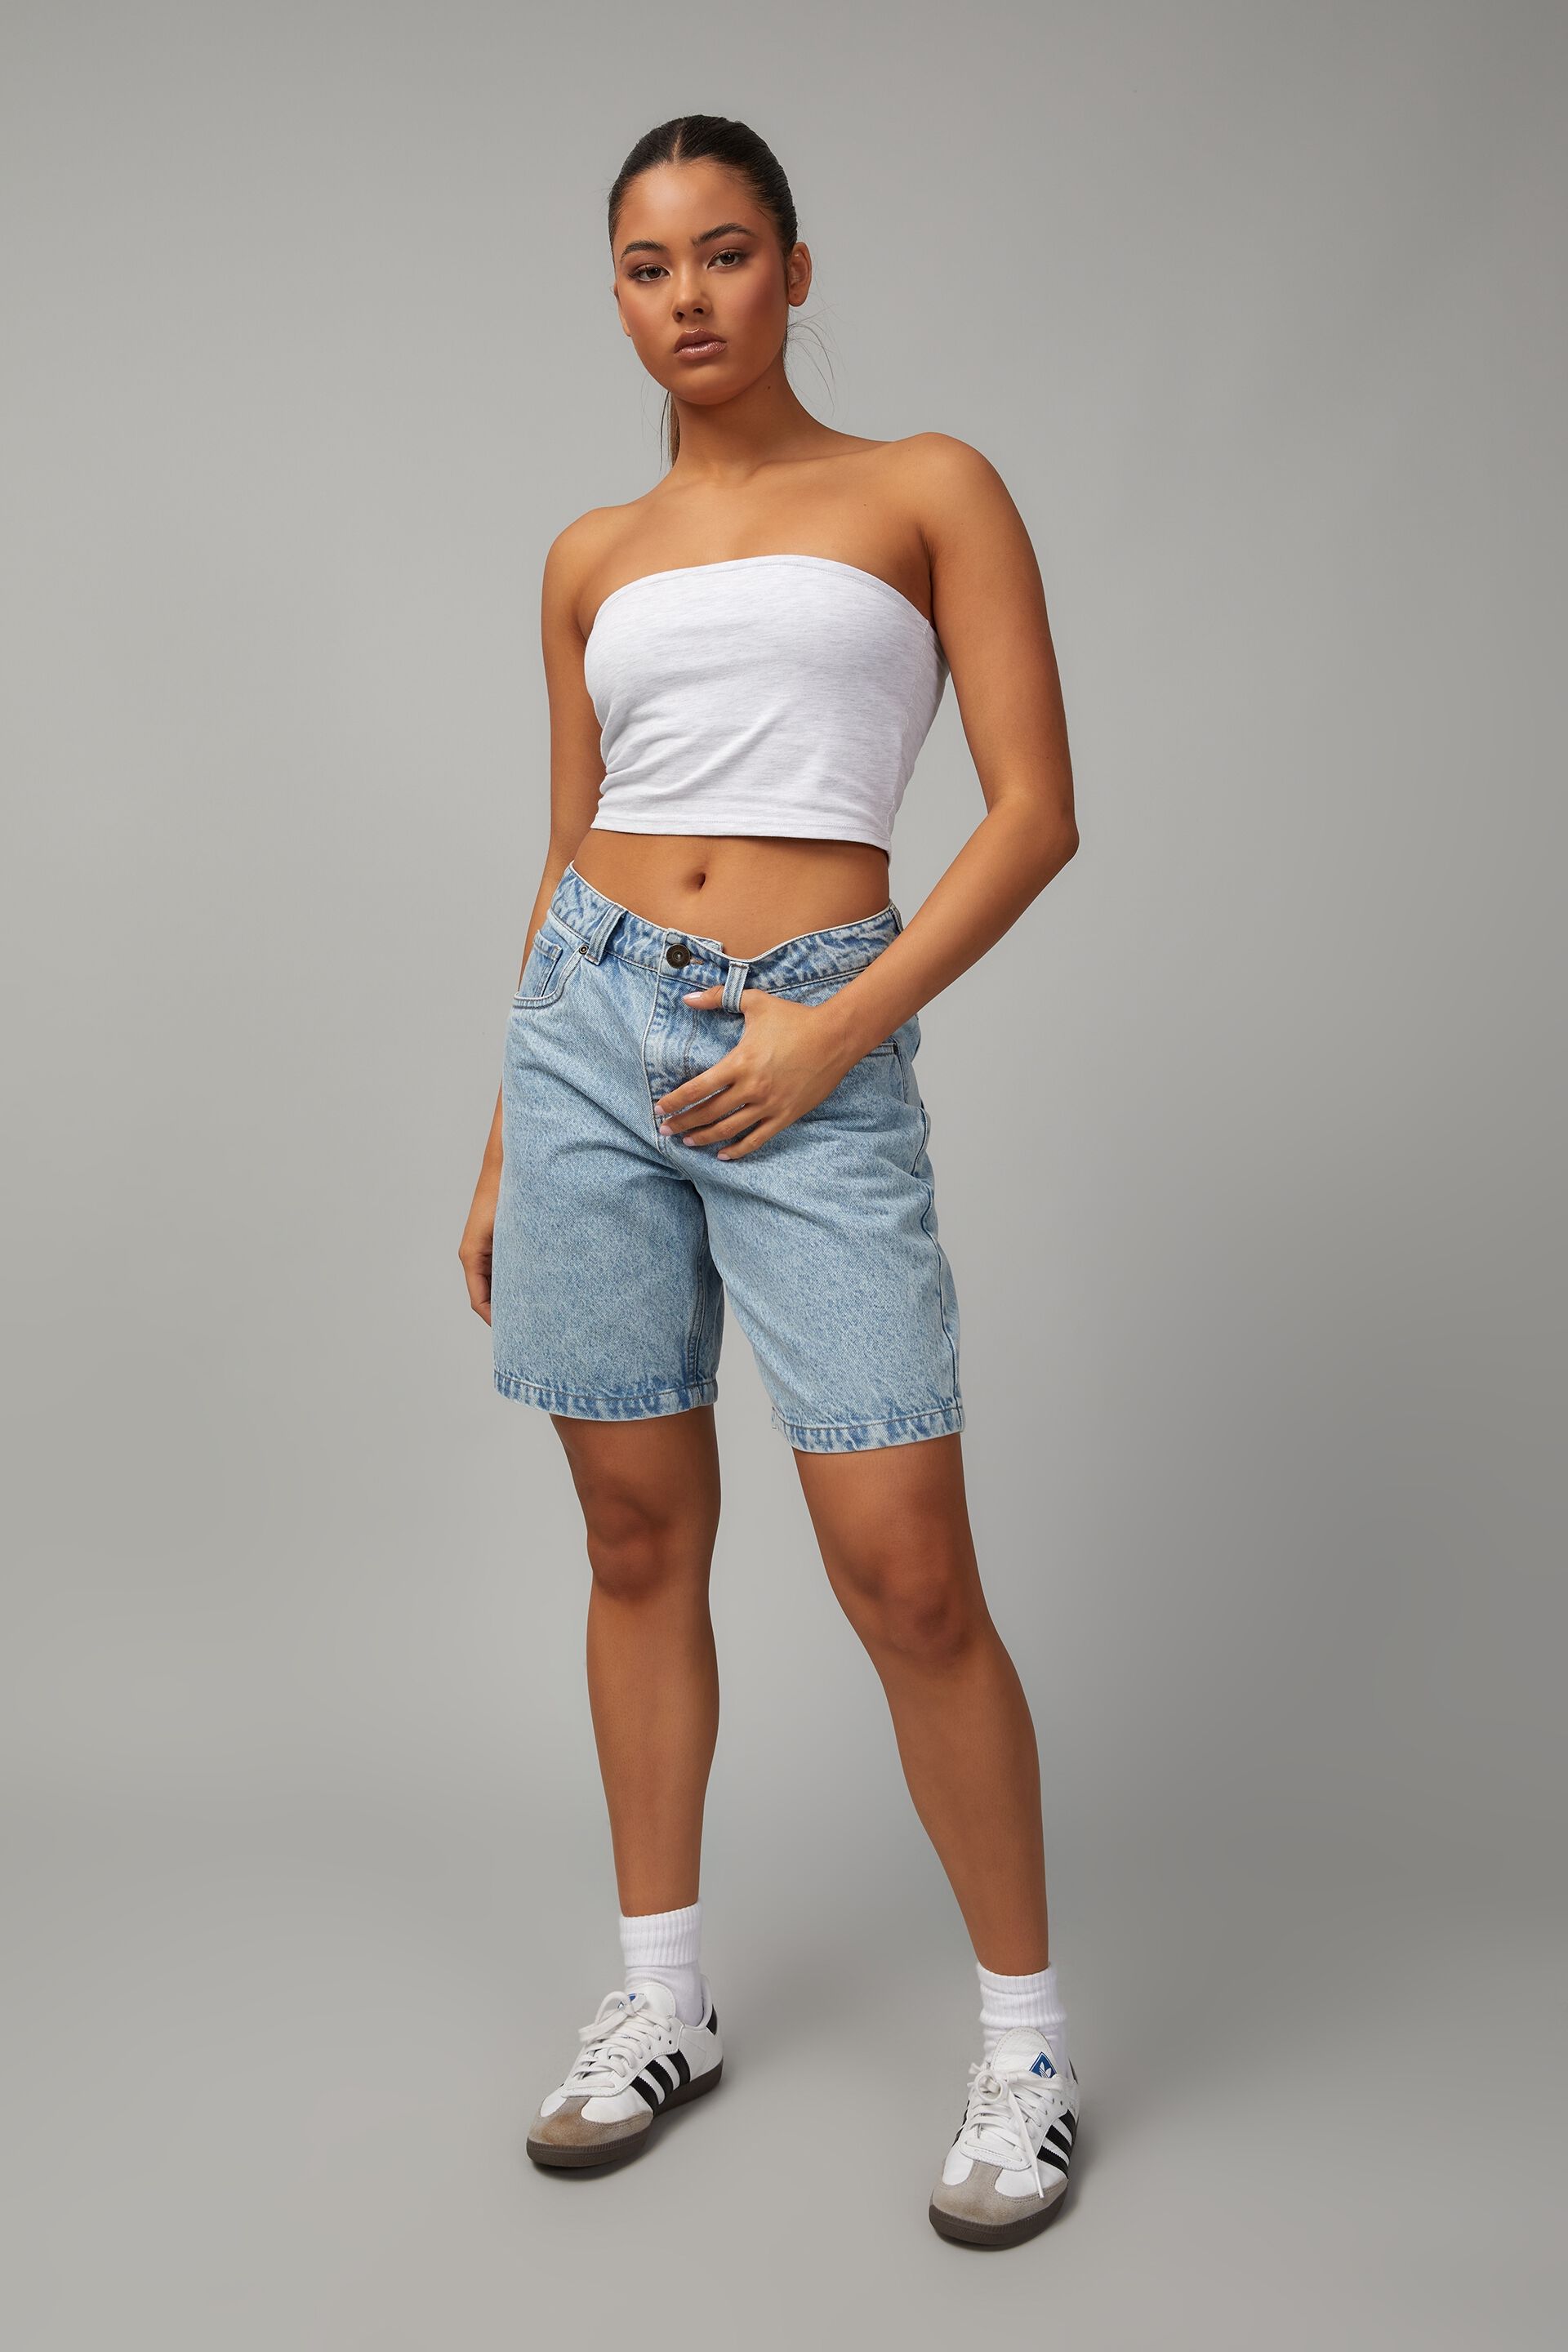 Floerns Women's Ripped Raw Hem High Waisted Distressed Denim Shorts A Light  Wash XS at Amazon Women's Clothing store